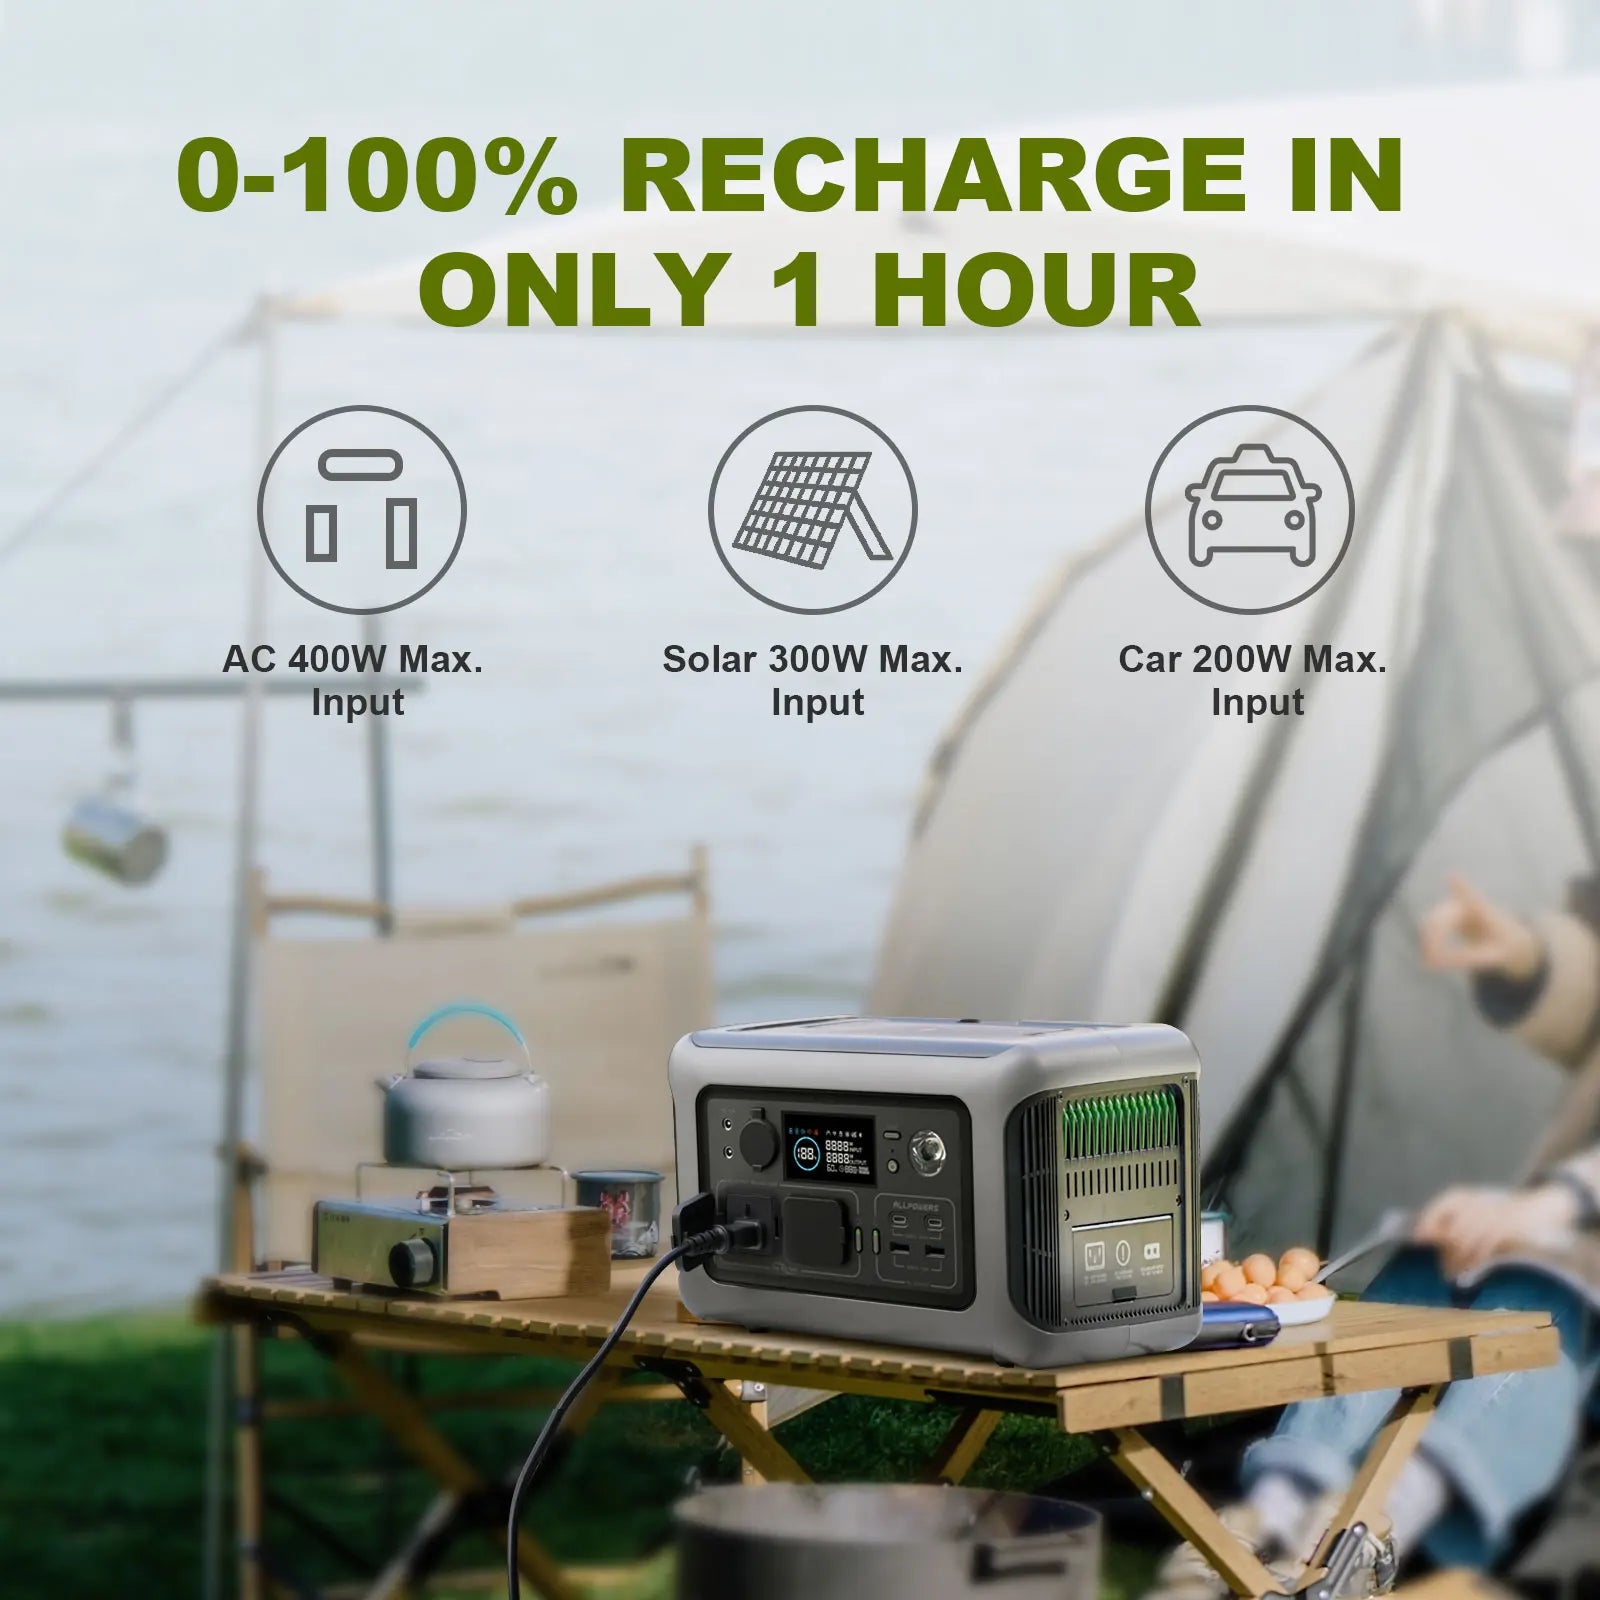 Portable Power Station R600, 299Wh Lifep04 Battery with 2X 600W (1200W Surge) AC Outlets for Outdoor Camping RV Home - Orvis Collection